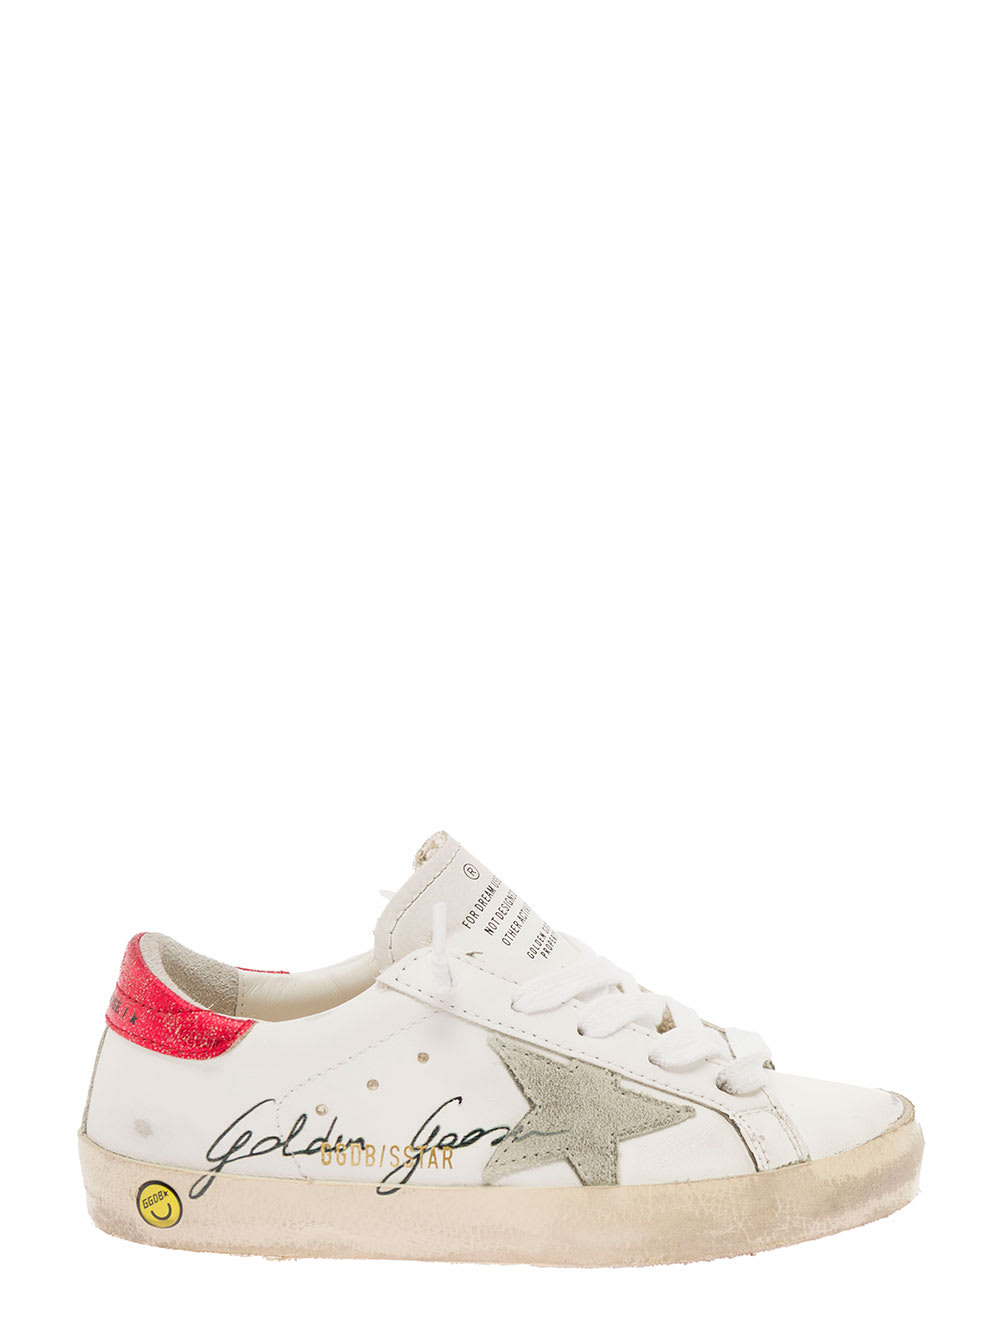 Star Vintage White Leather Sneakers With Logo Signature Golden Goose Kids Boy